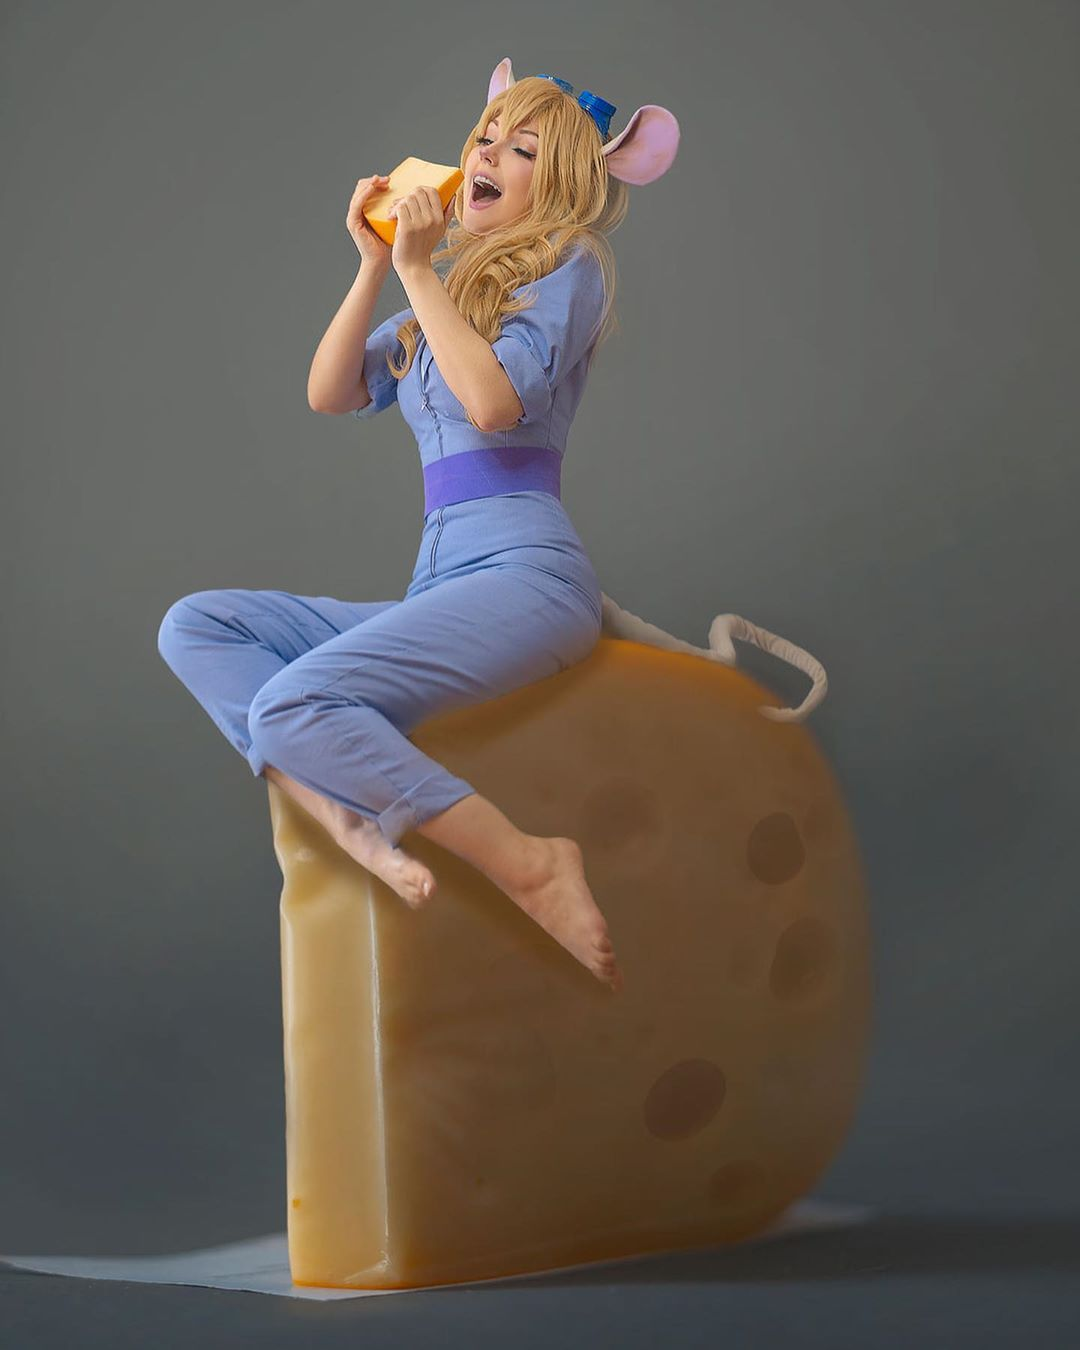 Gadget - Cosplay, Chip and Dale, Cartoons, Costume, Longpost, Gadget hackwrench, 